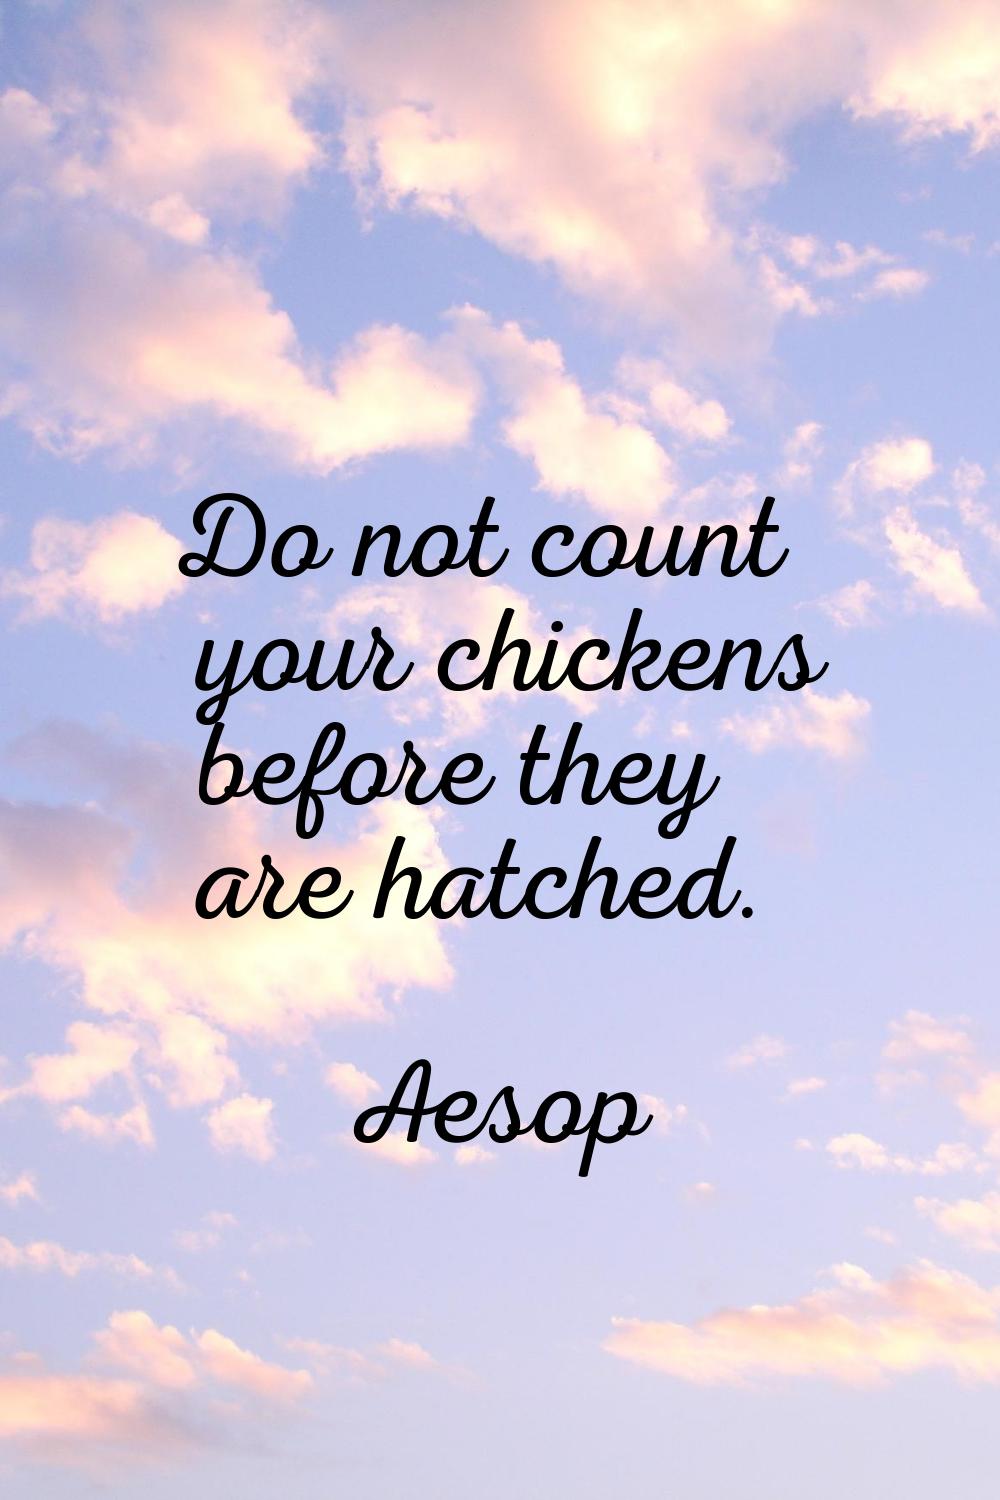 Do not count your chickens before they are hatched.